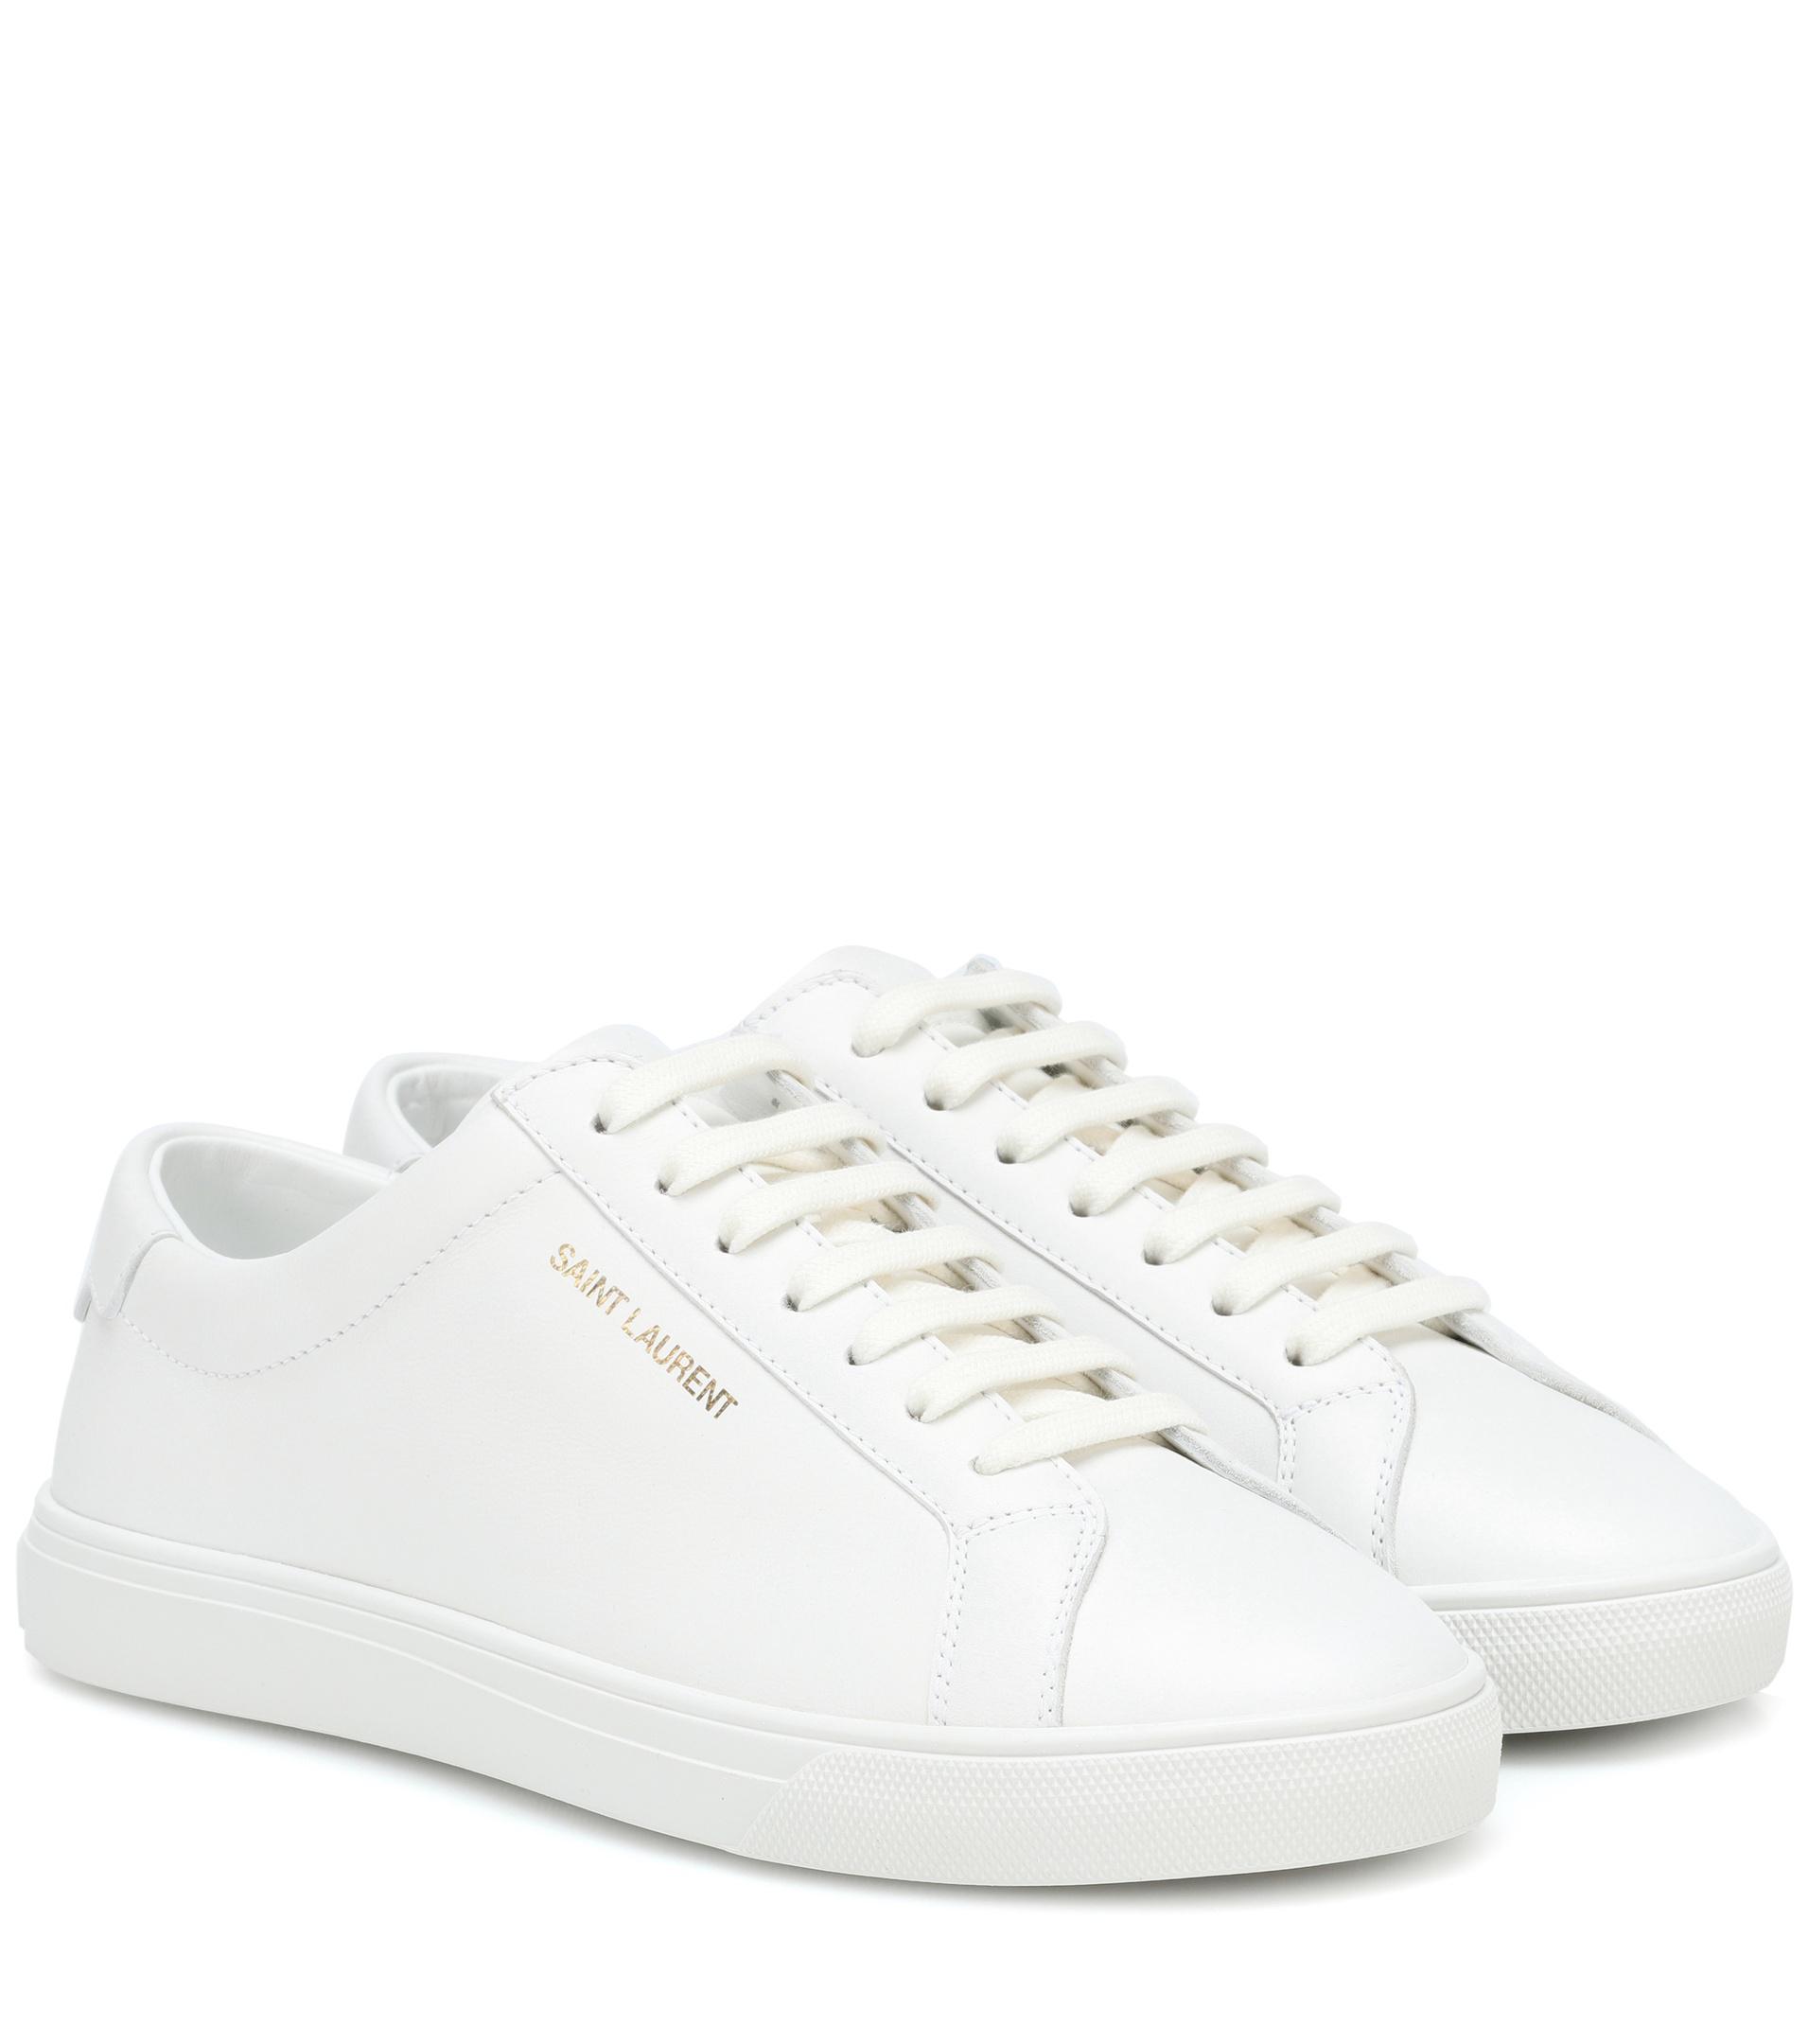 Saint Laurent Andy Leather Sneakers in White - Lyst